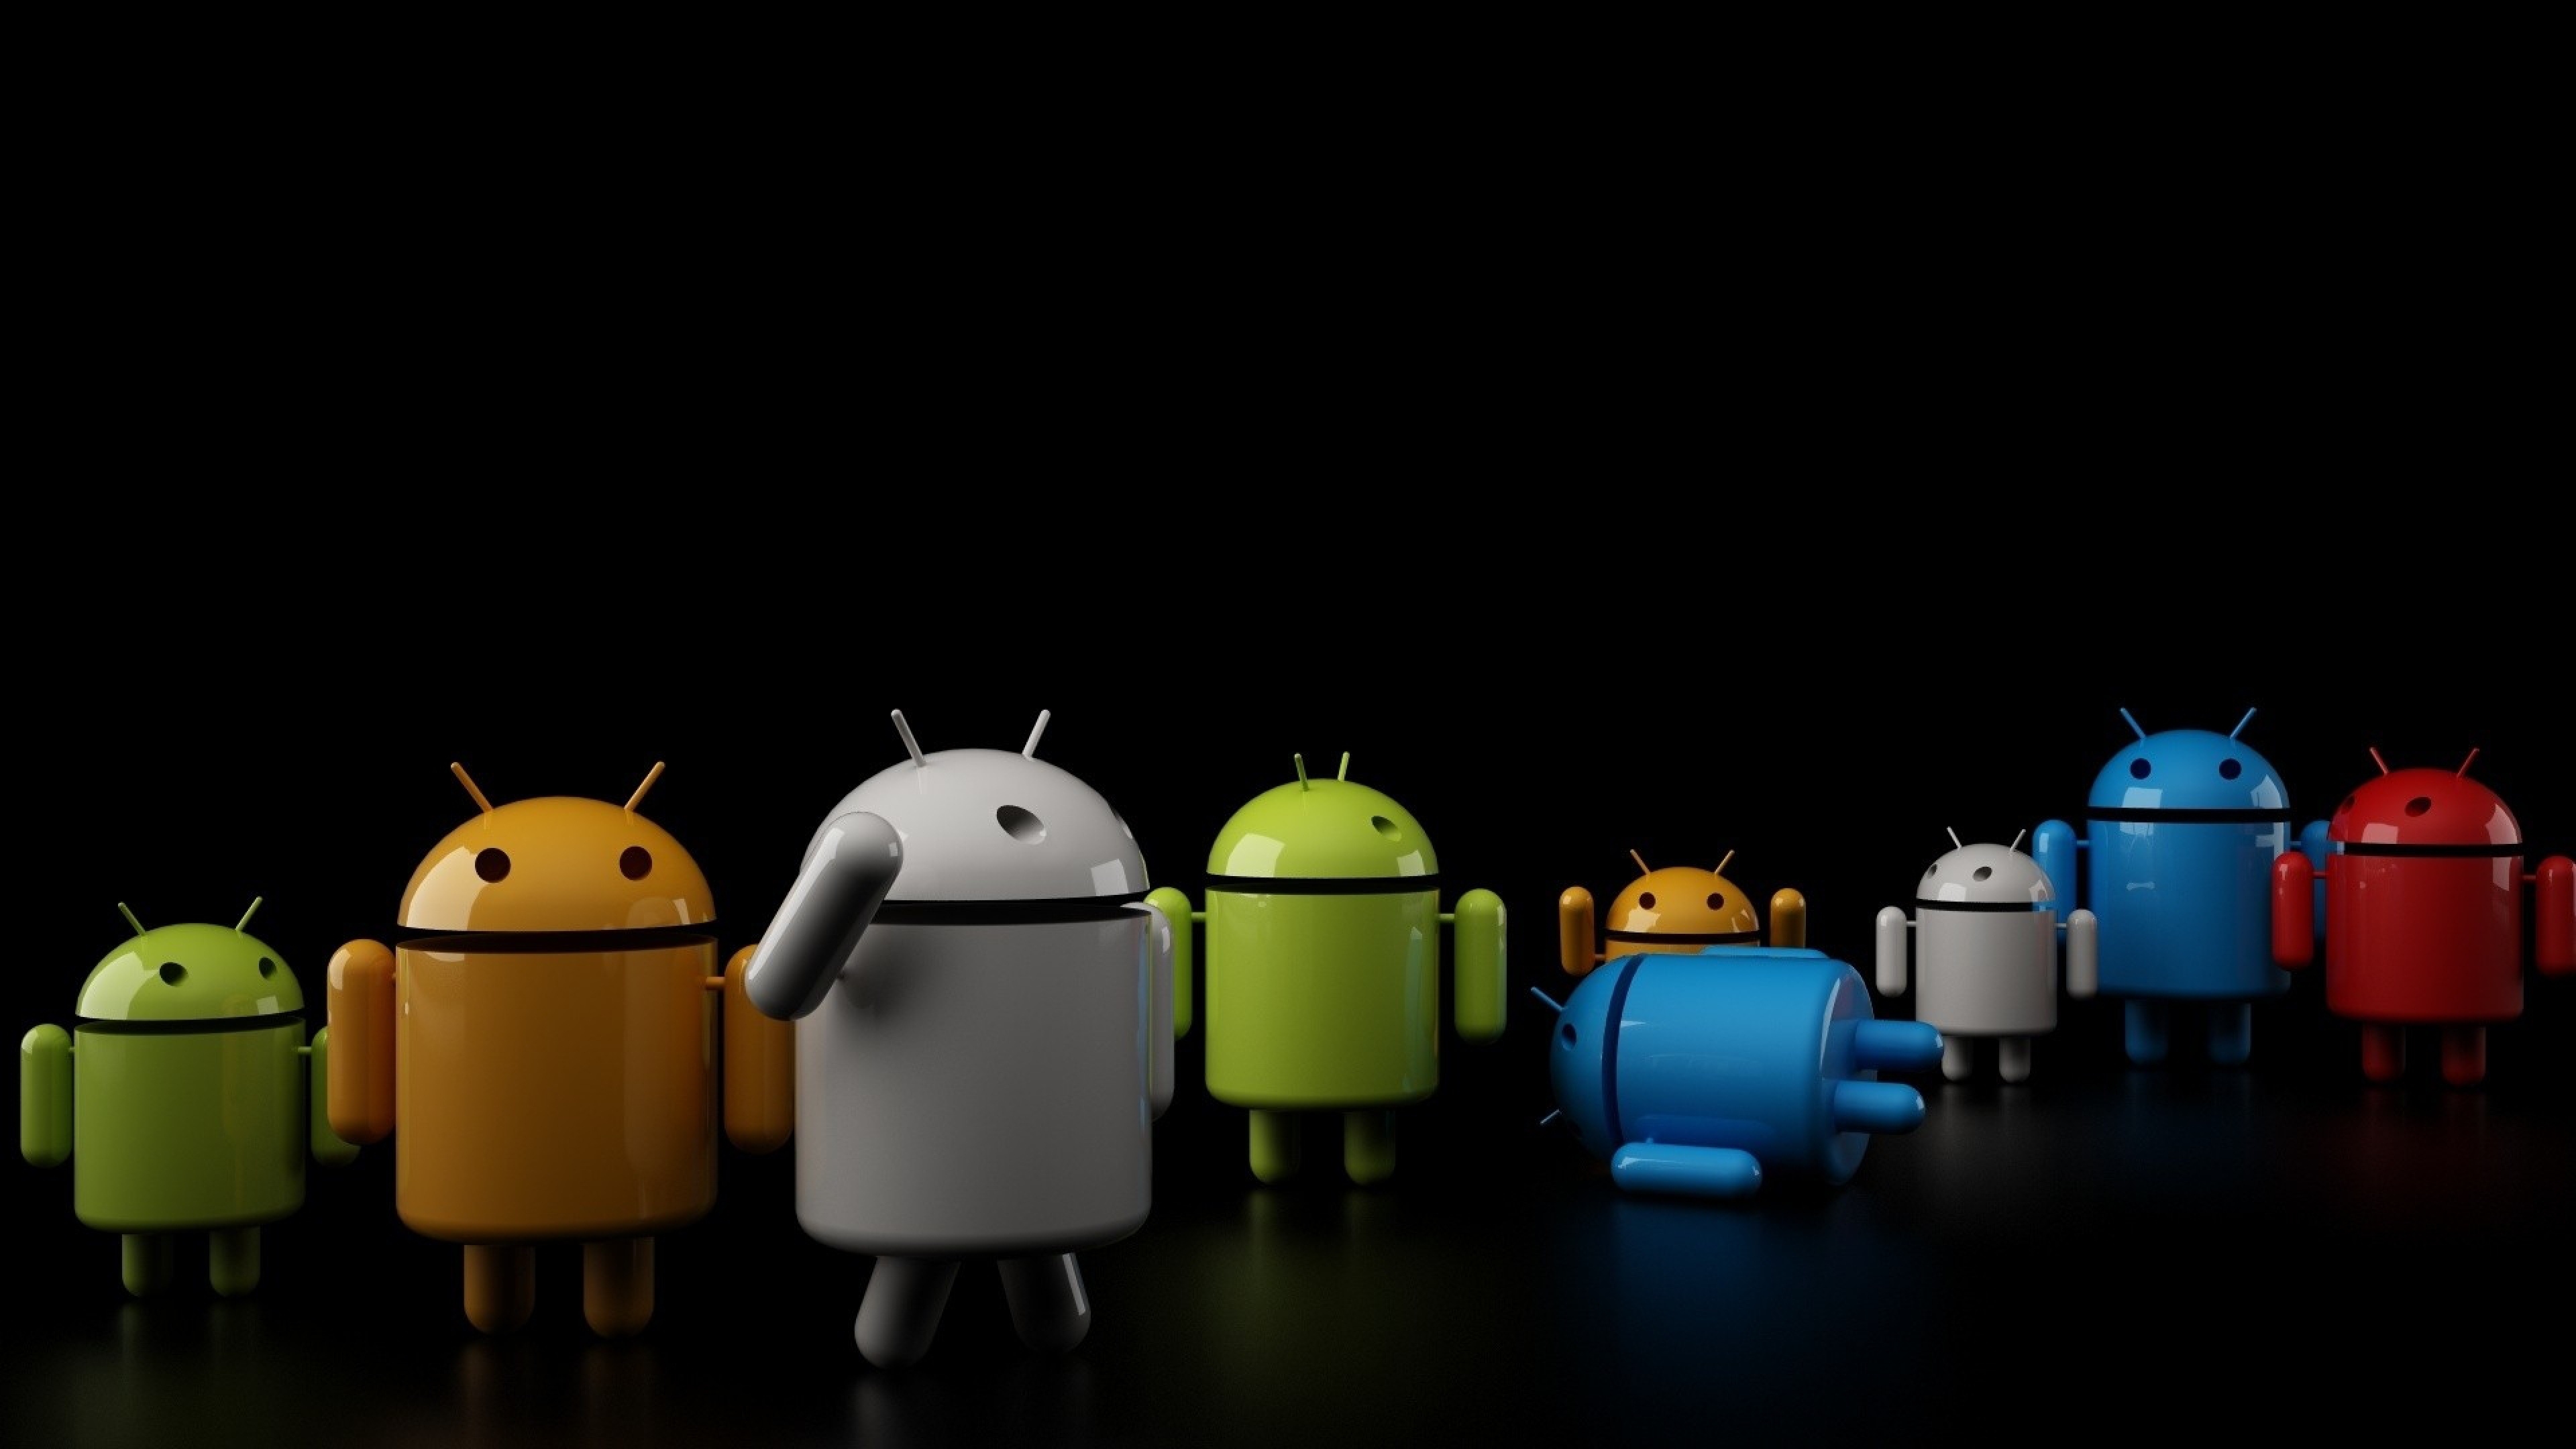 Android Os Robot Gray Blue Green Wallpaper Background